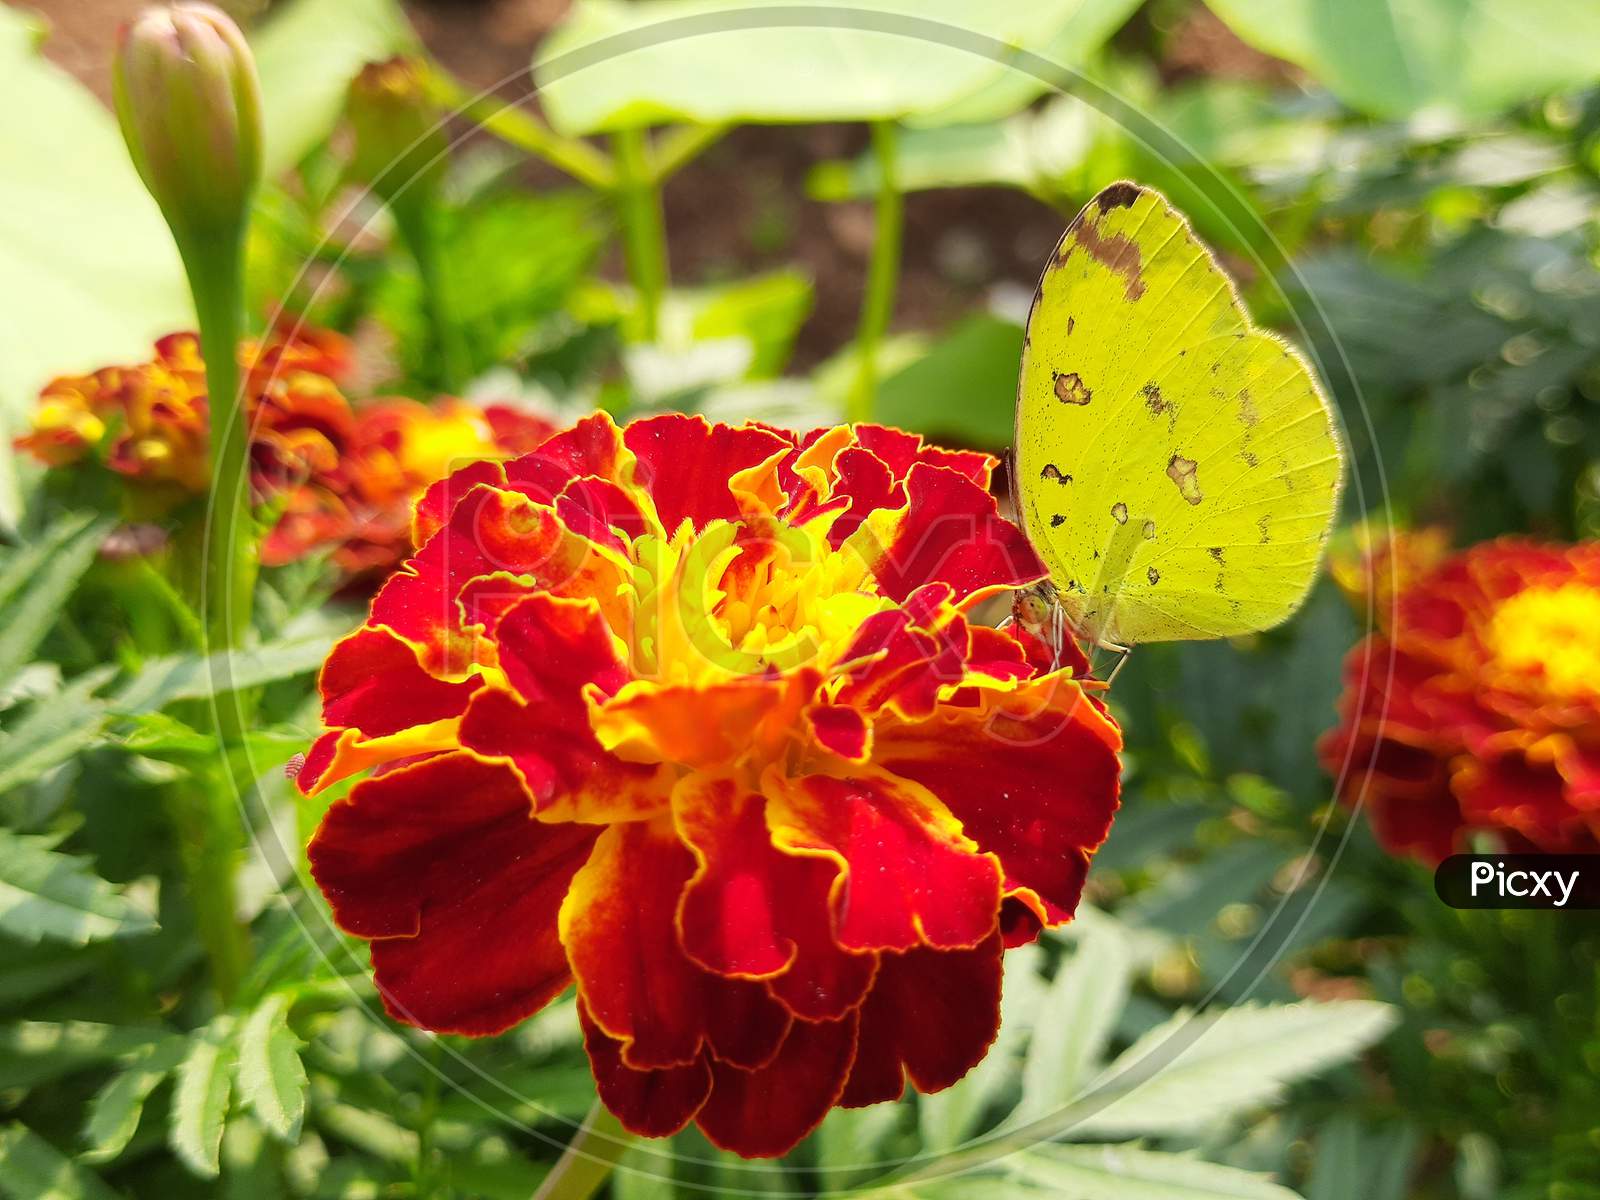 How a butterfly is sucking juice from a flower.